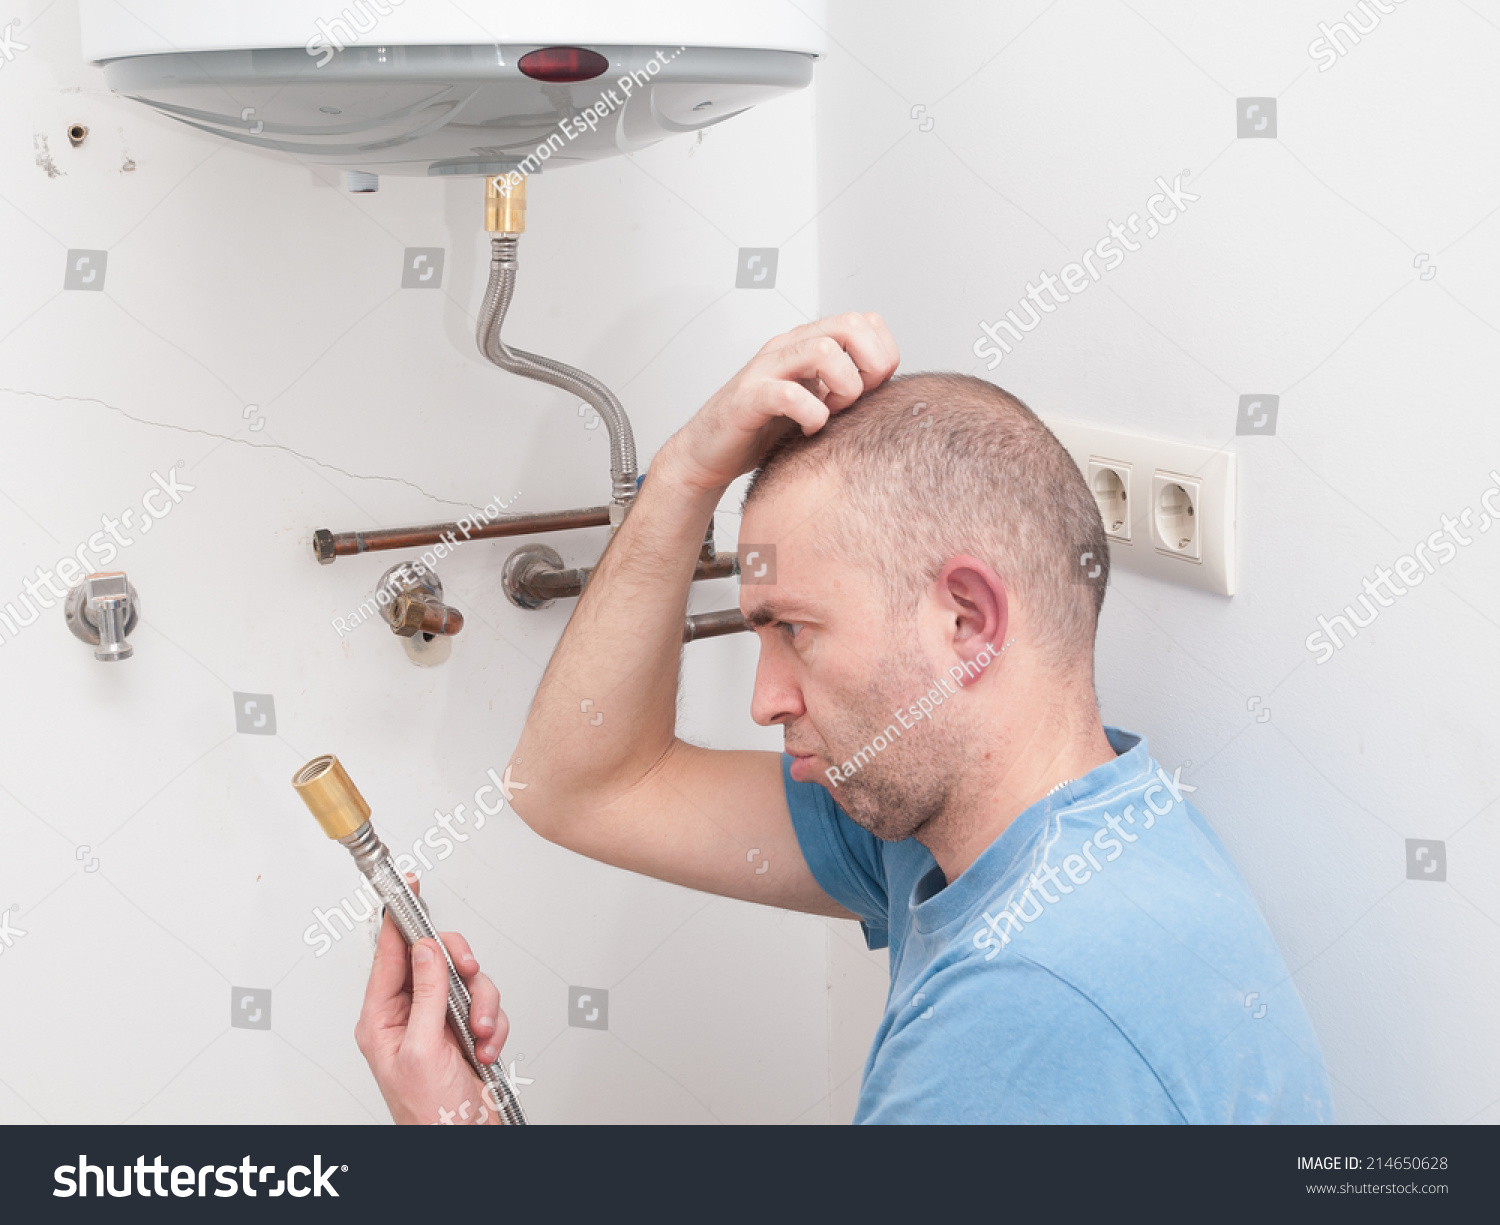 Inexperienced plumber trying to repair an electric water heater #214650628